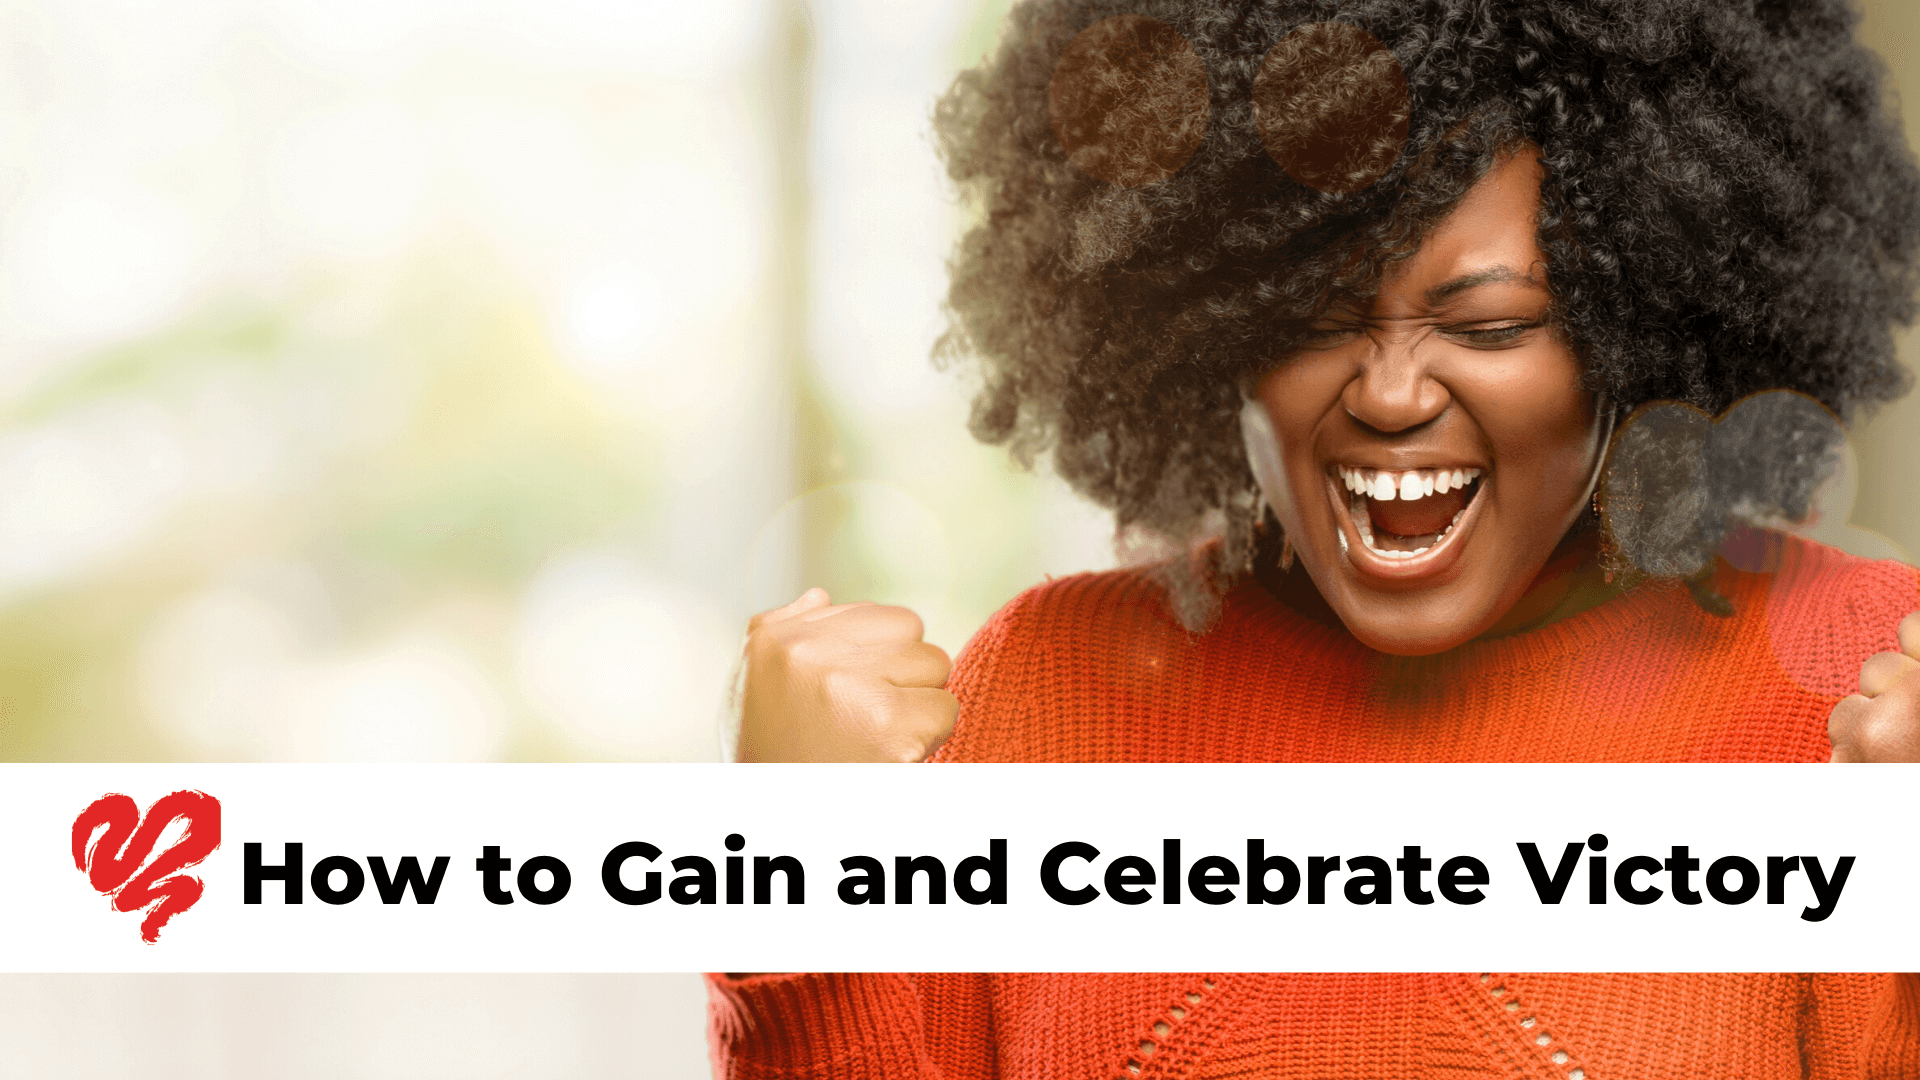 How to Gain and Celebrate Victory